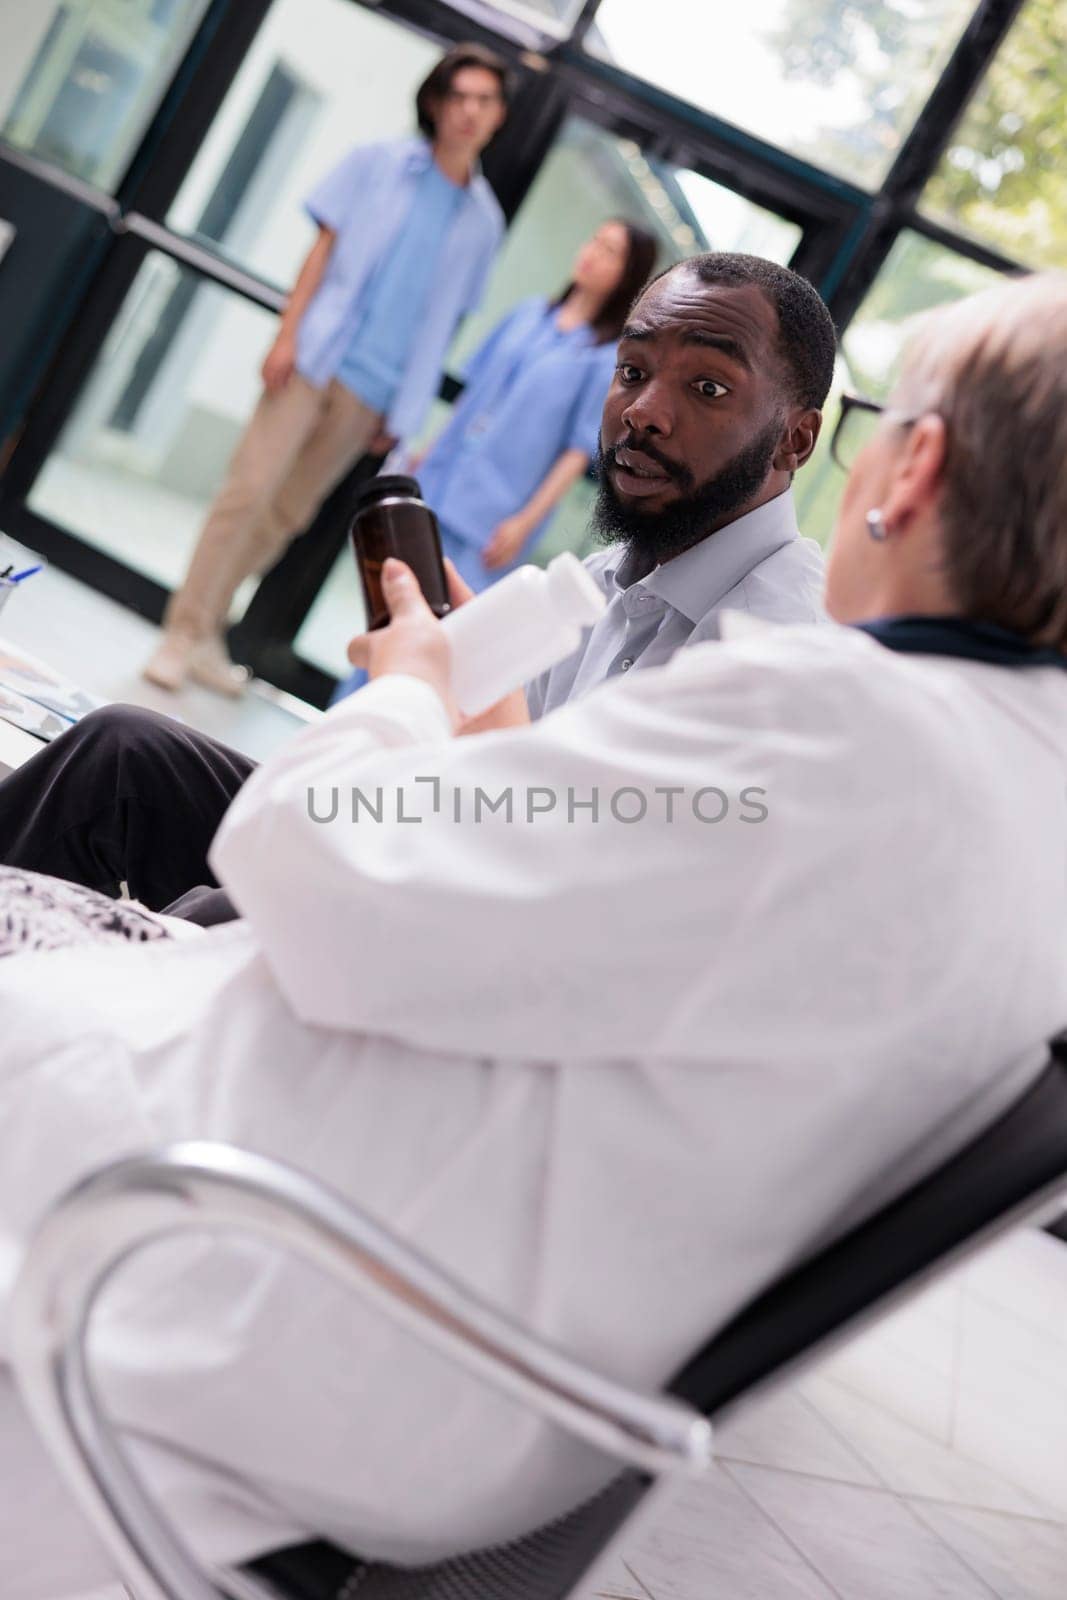 Senior specialist doctor discussing health care treatment with patient while showing pills bottle during consultation in hospital waiting area. Diverse people standing in lobby, medicine service